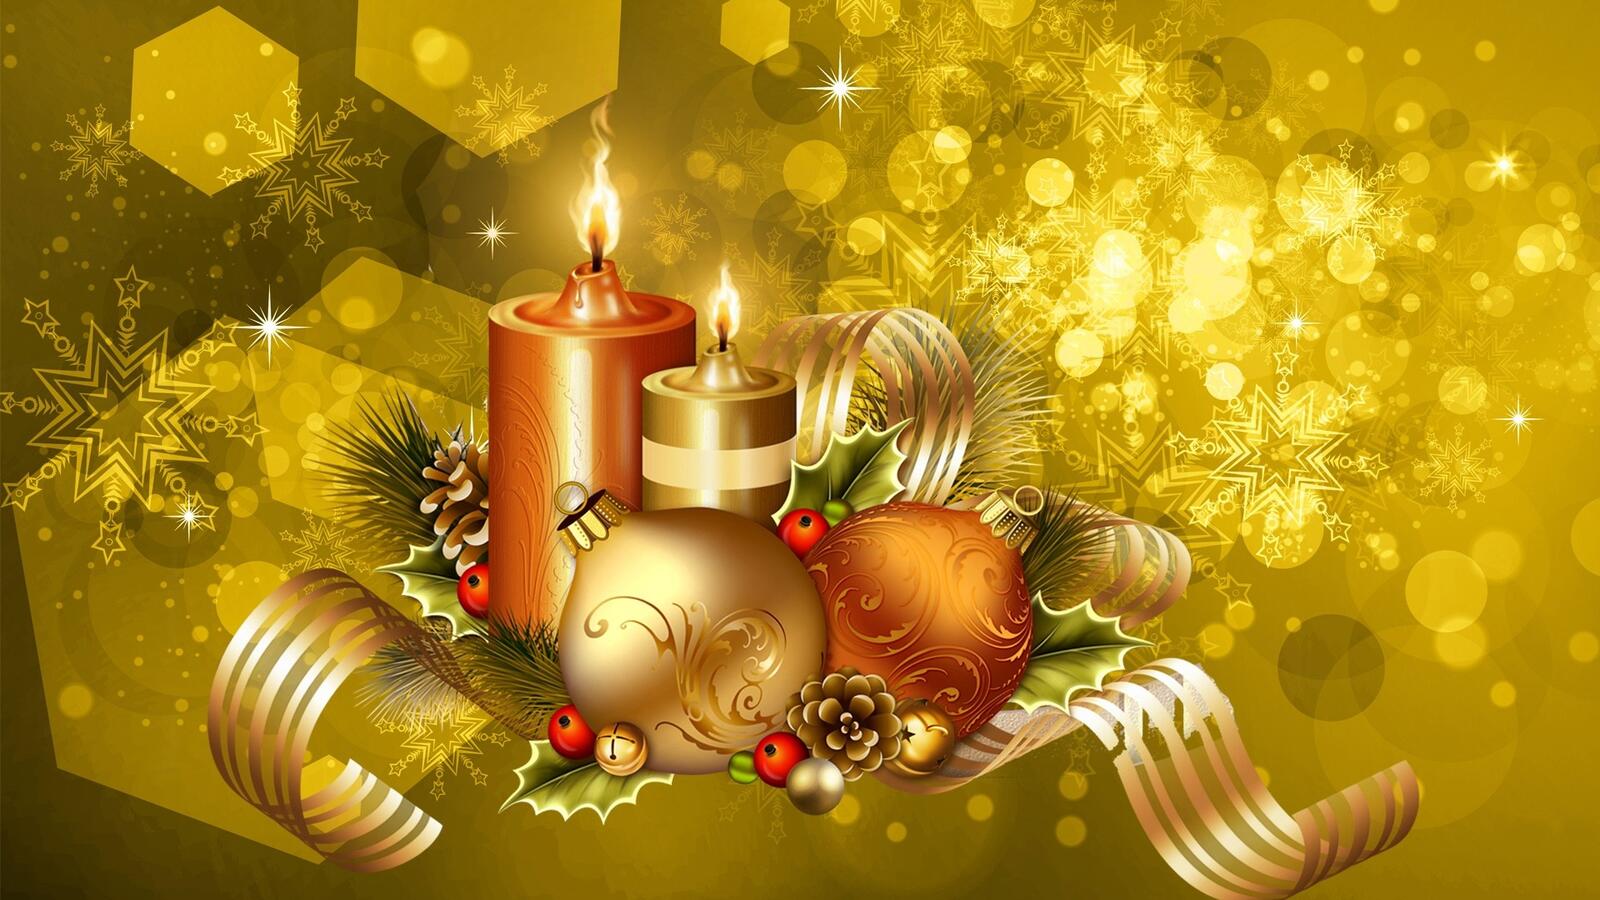 Wallpapers Christmas Wallpaper background candle on the desktop